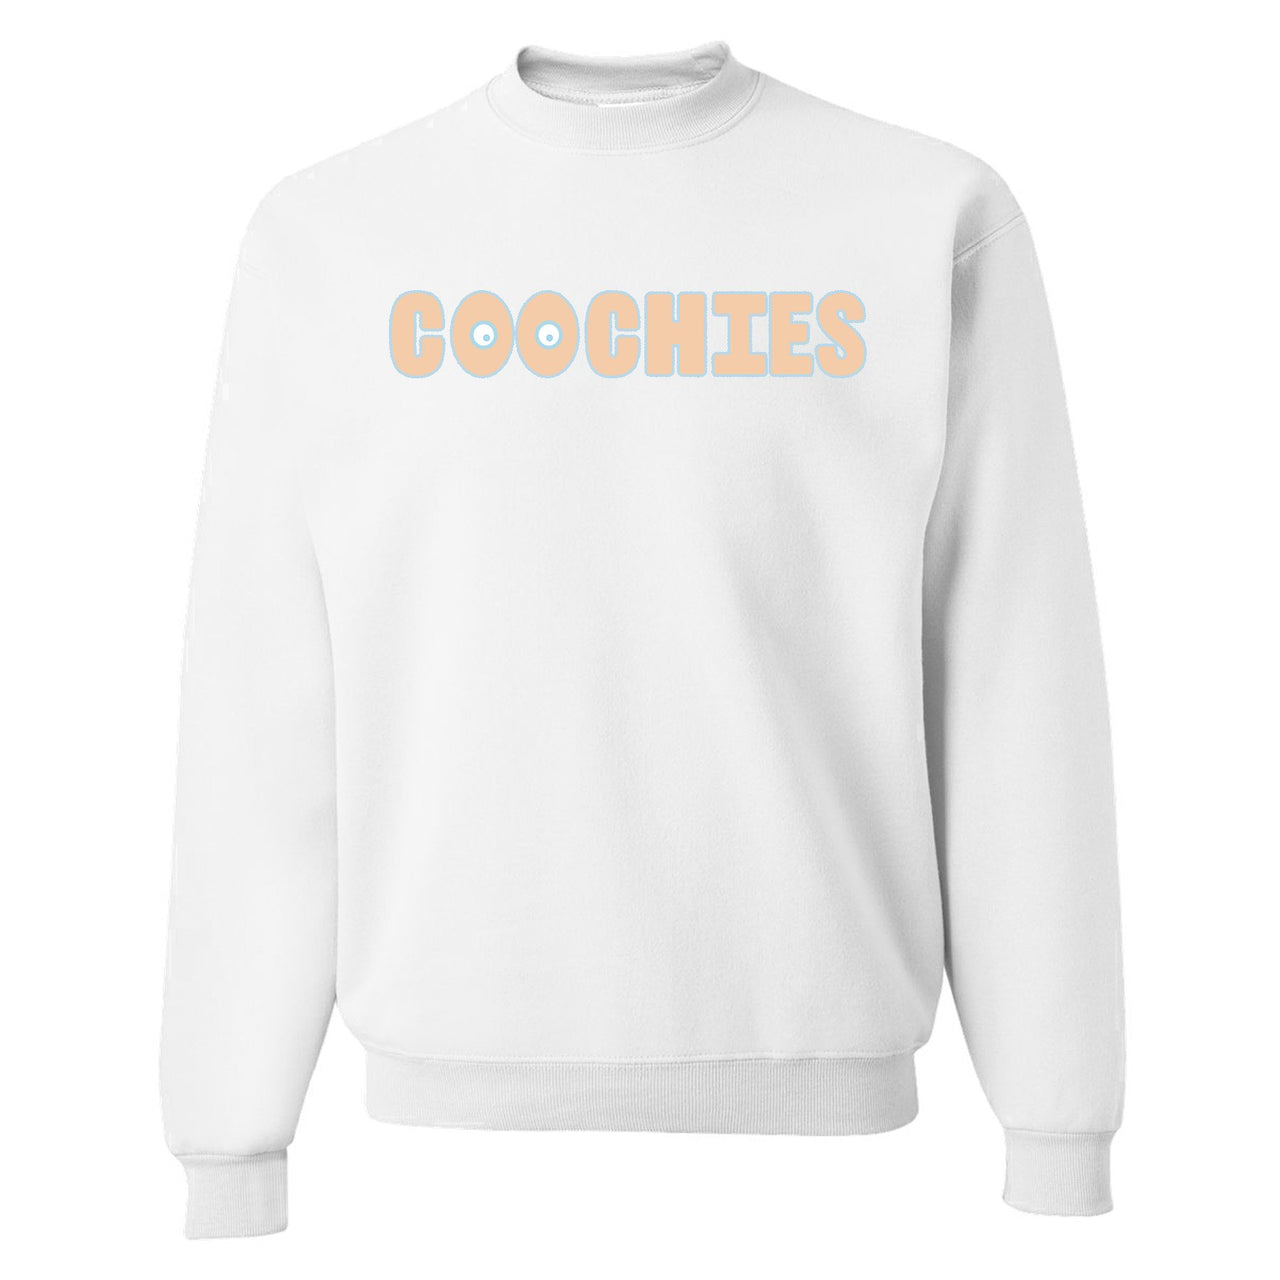 Hyperspace 350s Crewneck Sweater | Coochies, White